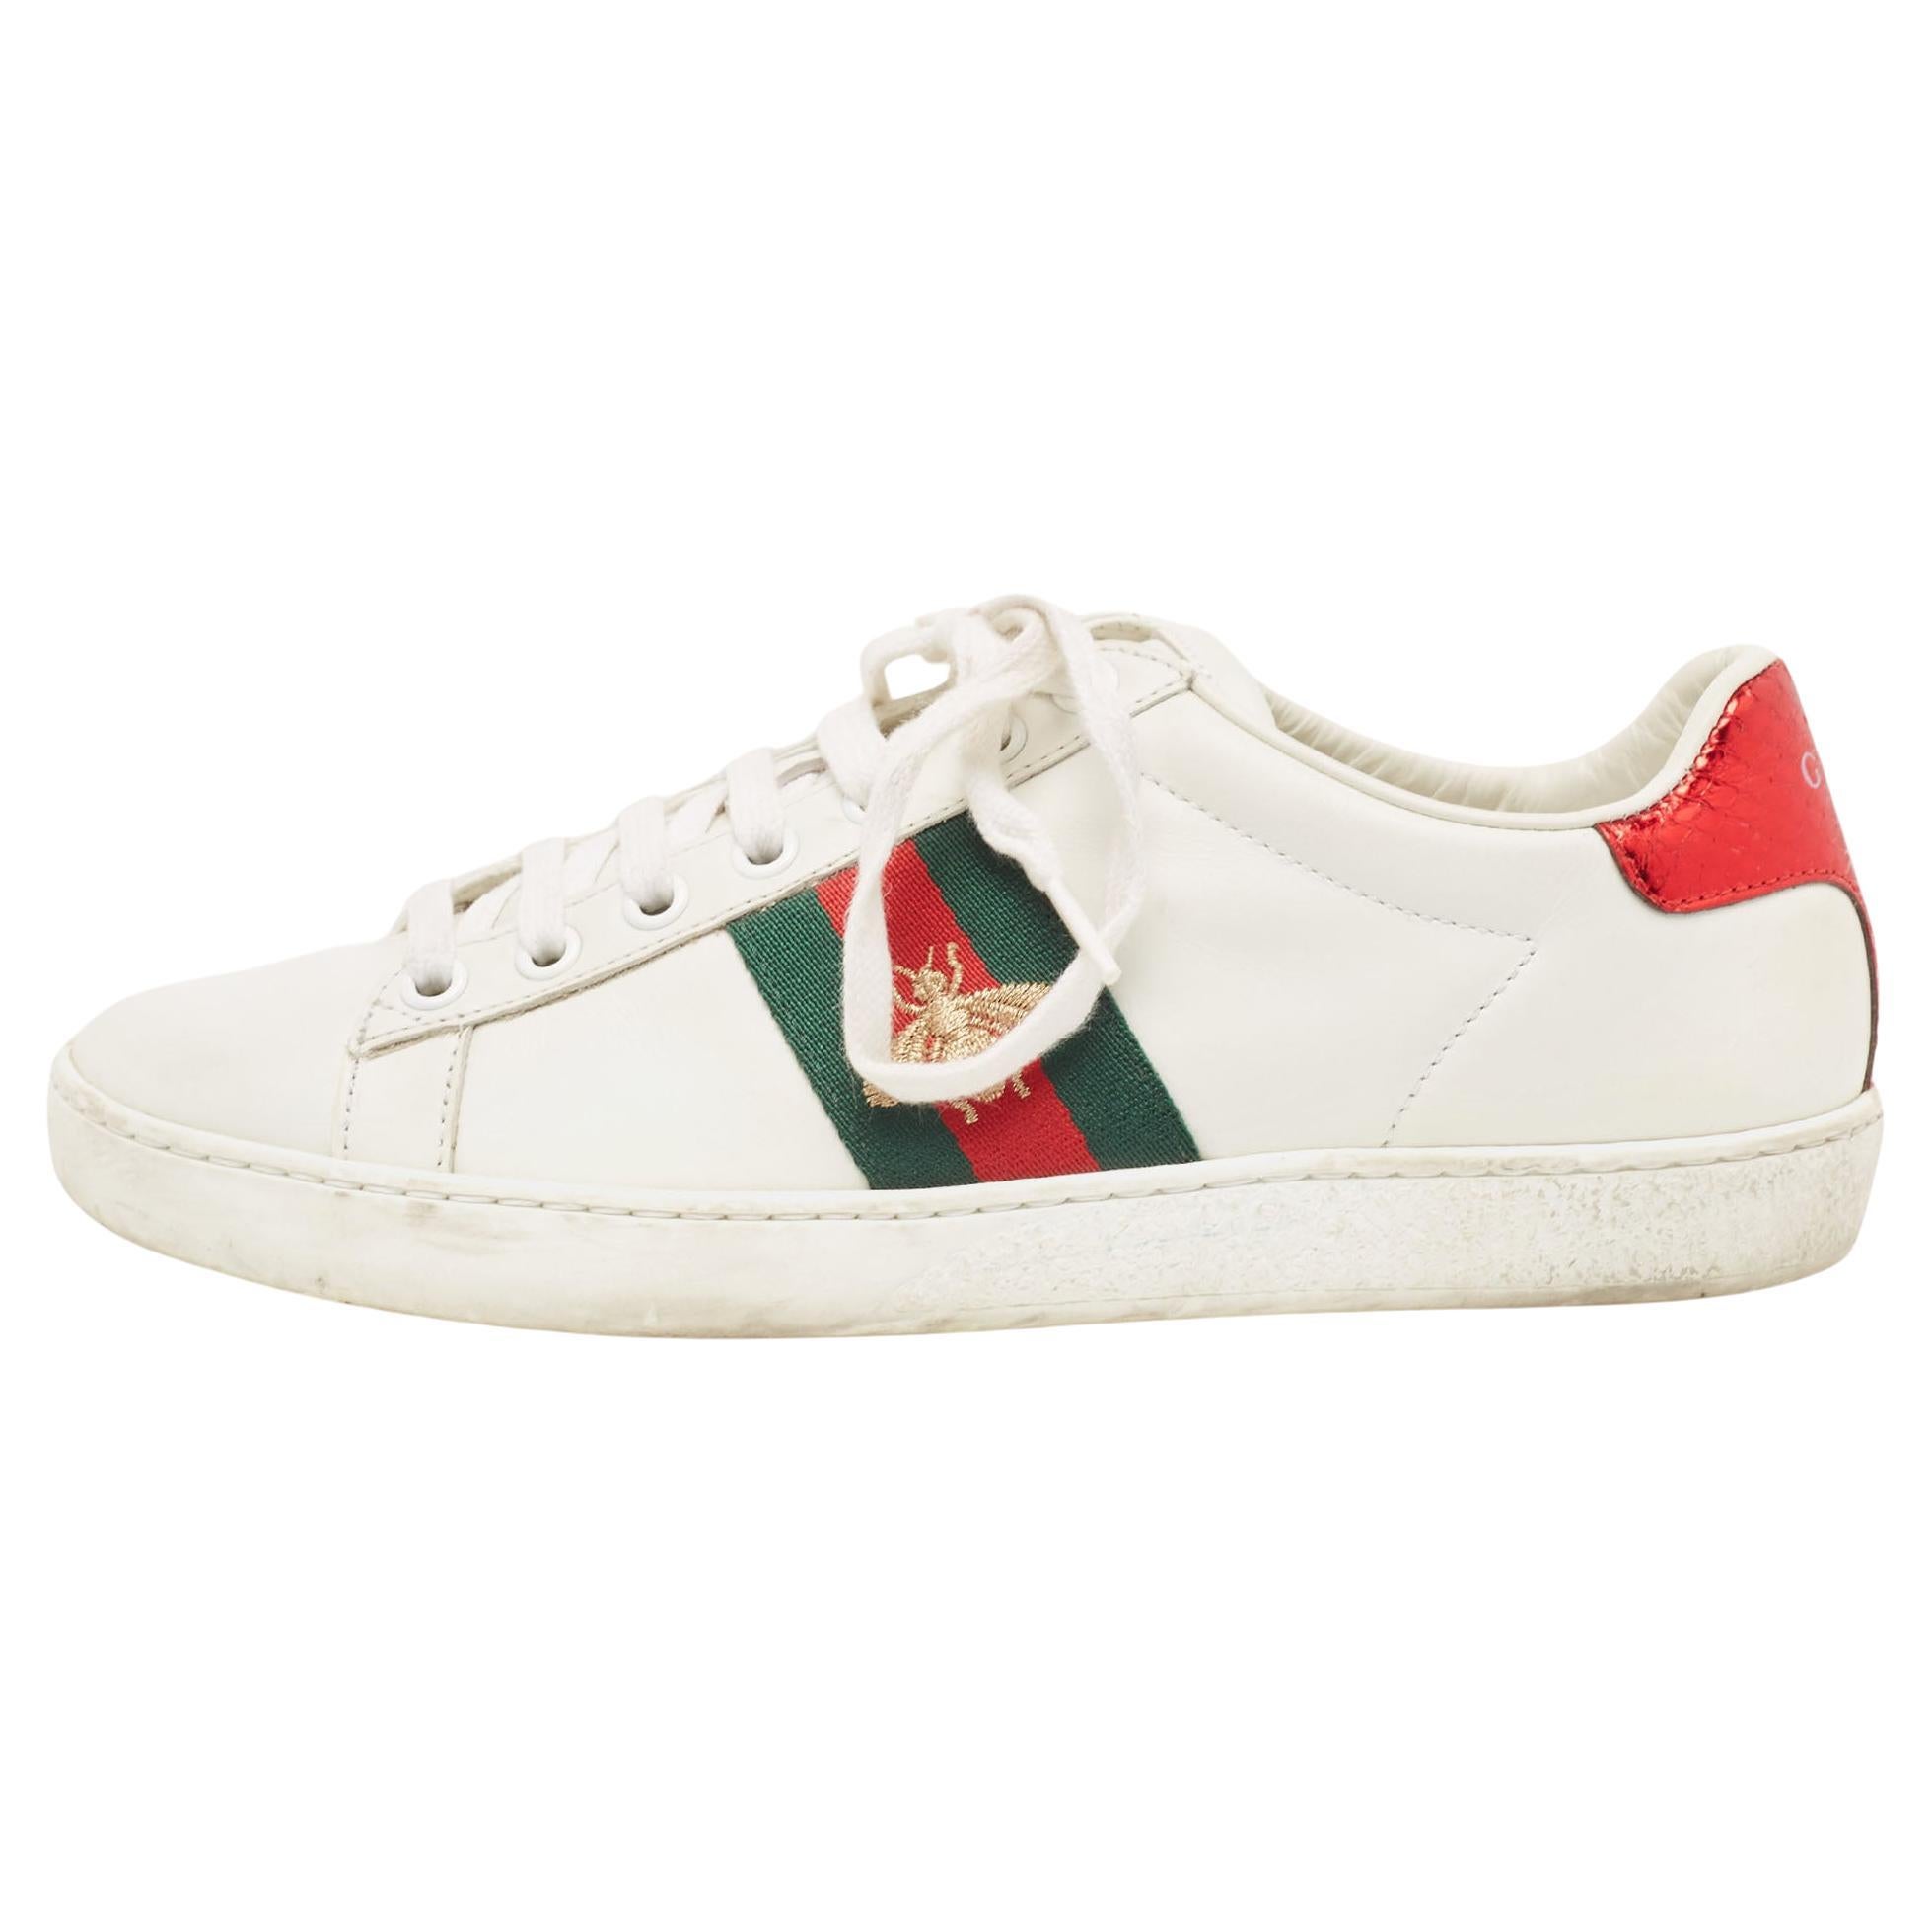 Gucci White Leather Embroidered Bee Ace Sneakers Size 36 For Sale